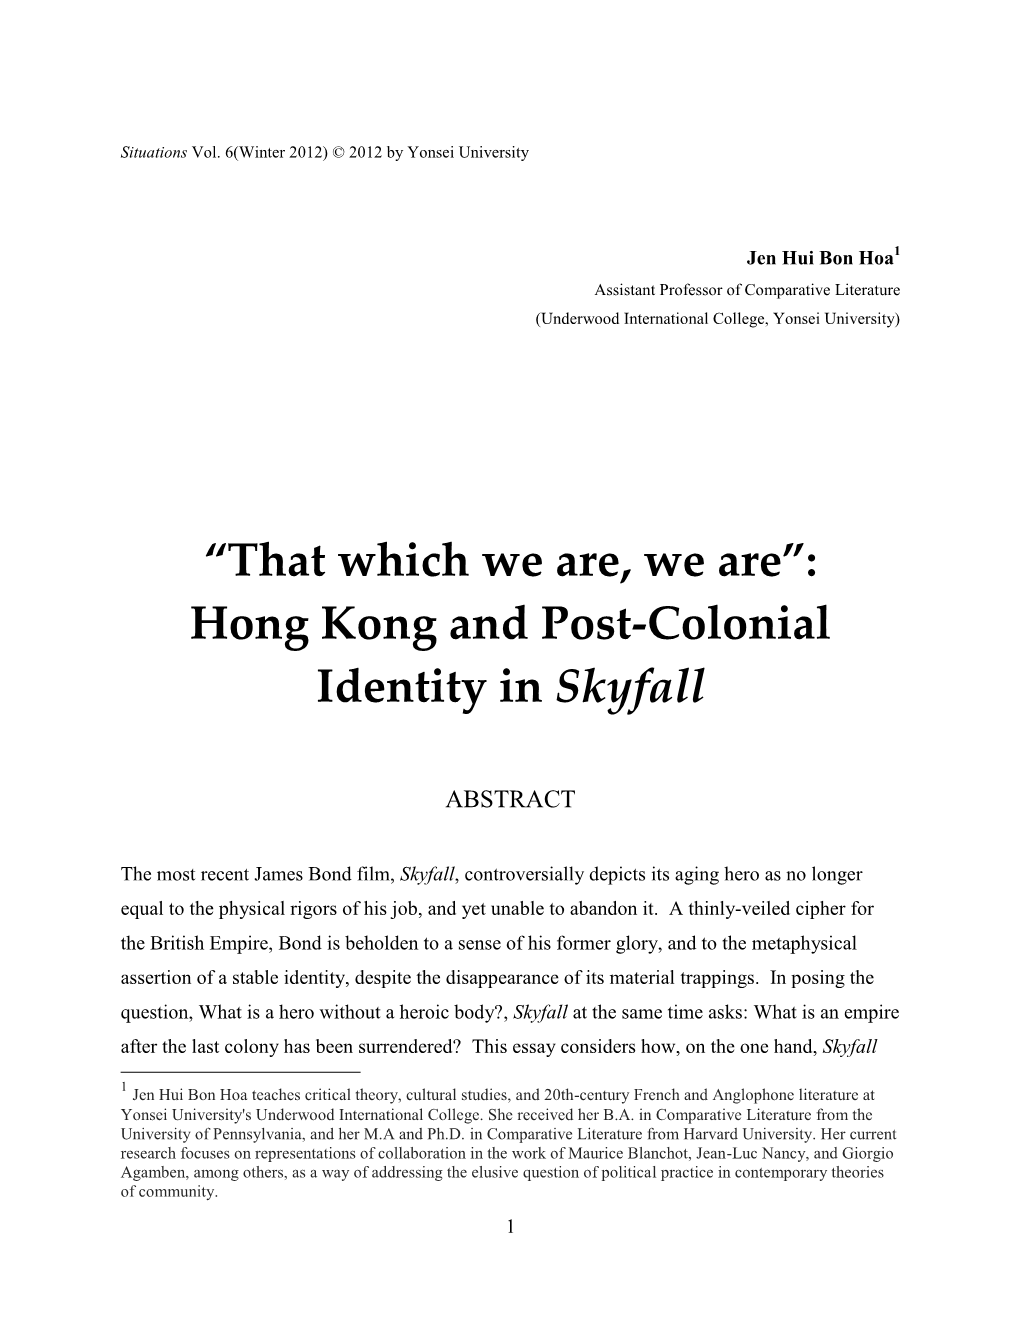 Hong Kong and Post-Colonial Identity in Skyfall